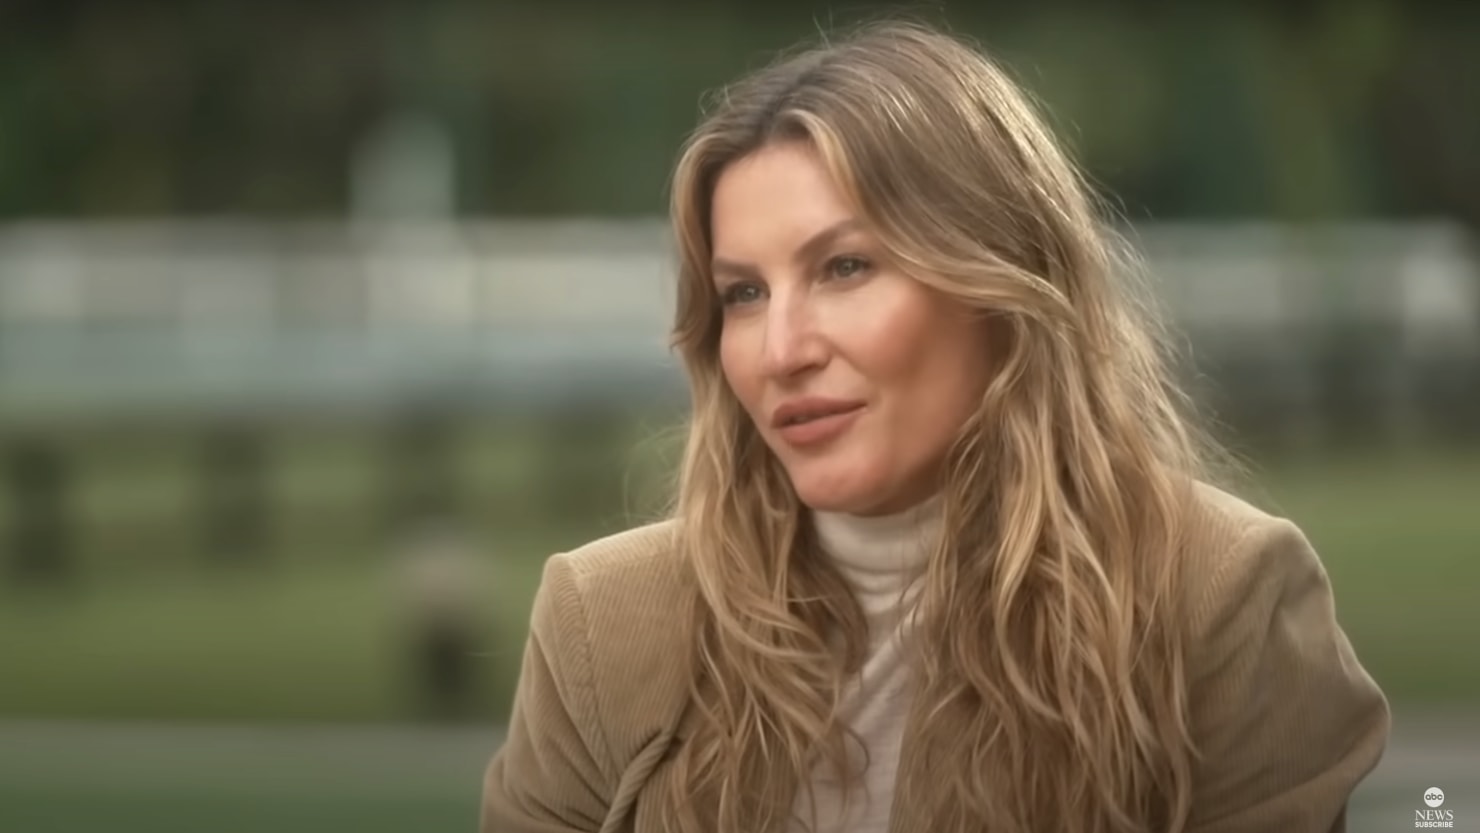 Gisele Bündchen Gets Emotional and Takes Control of Her Narrative in Revealing Interview with Robin Roberts